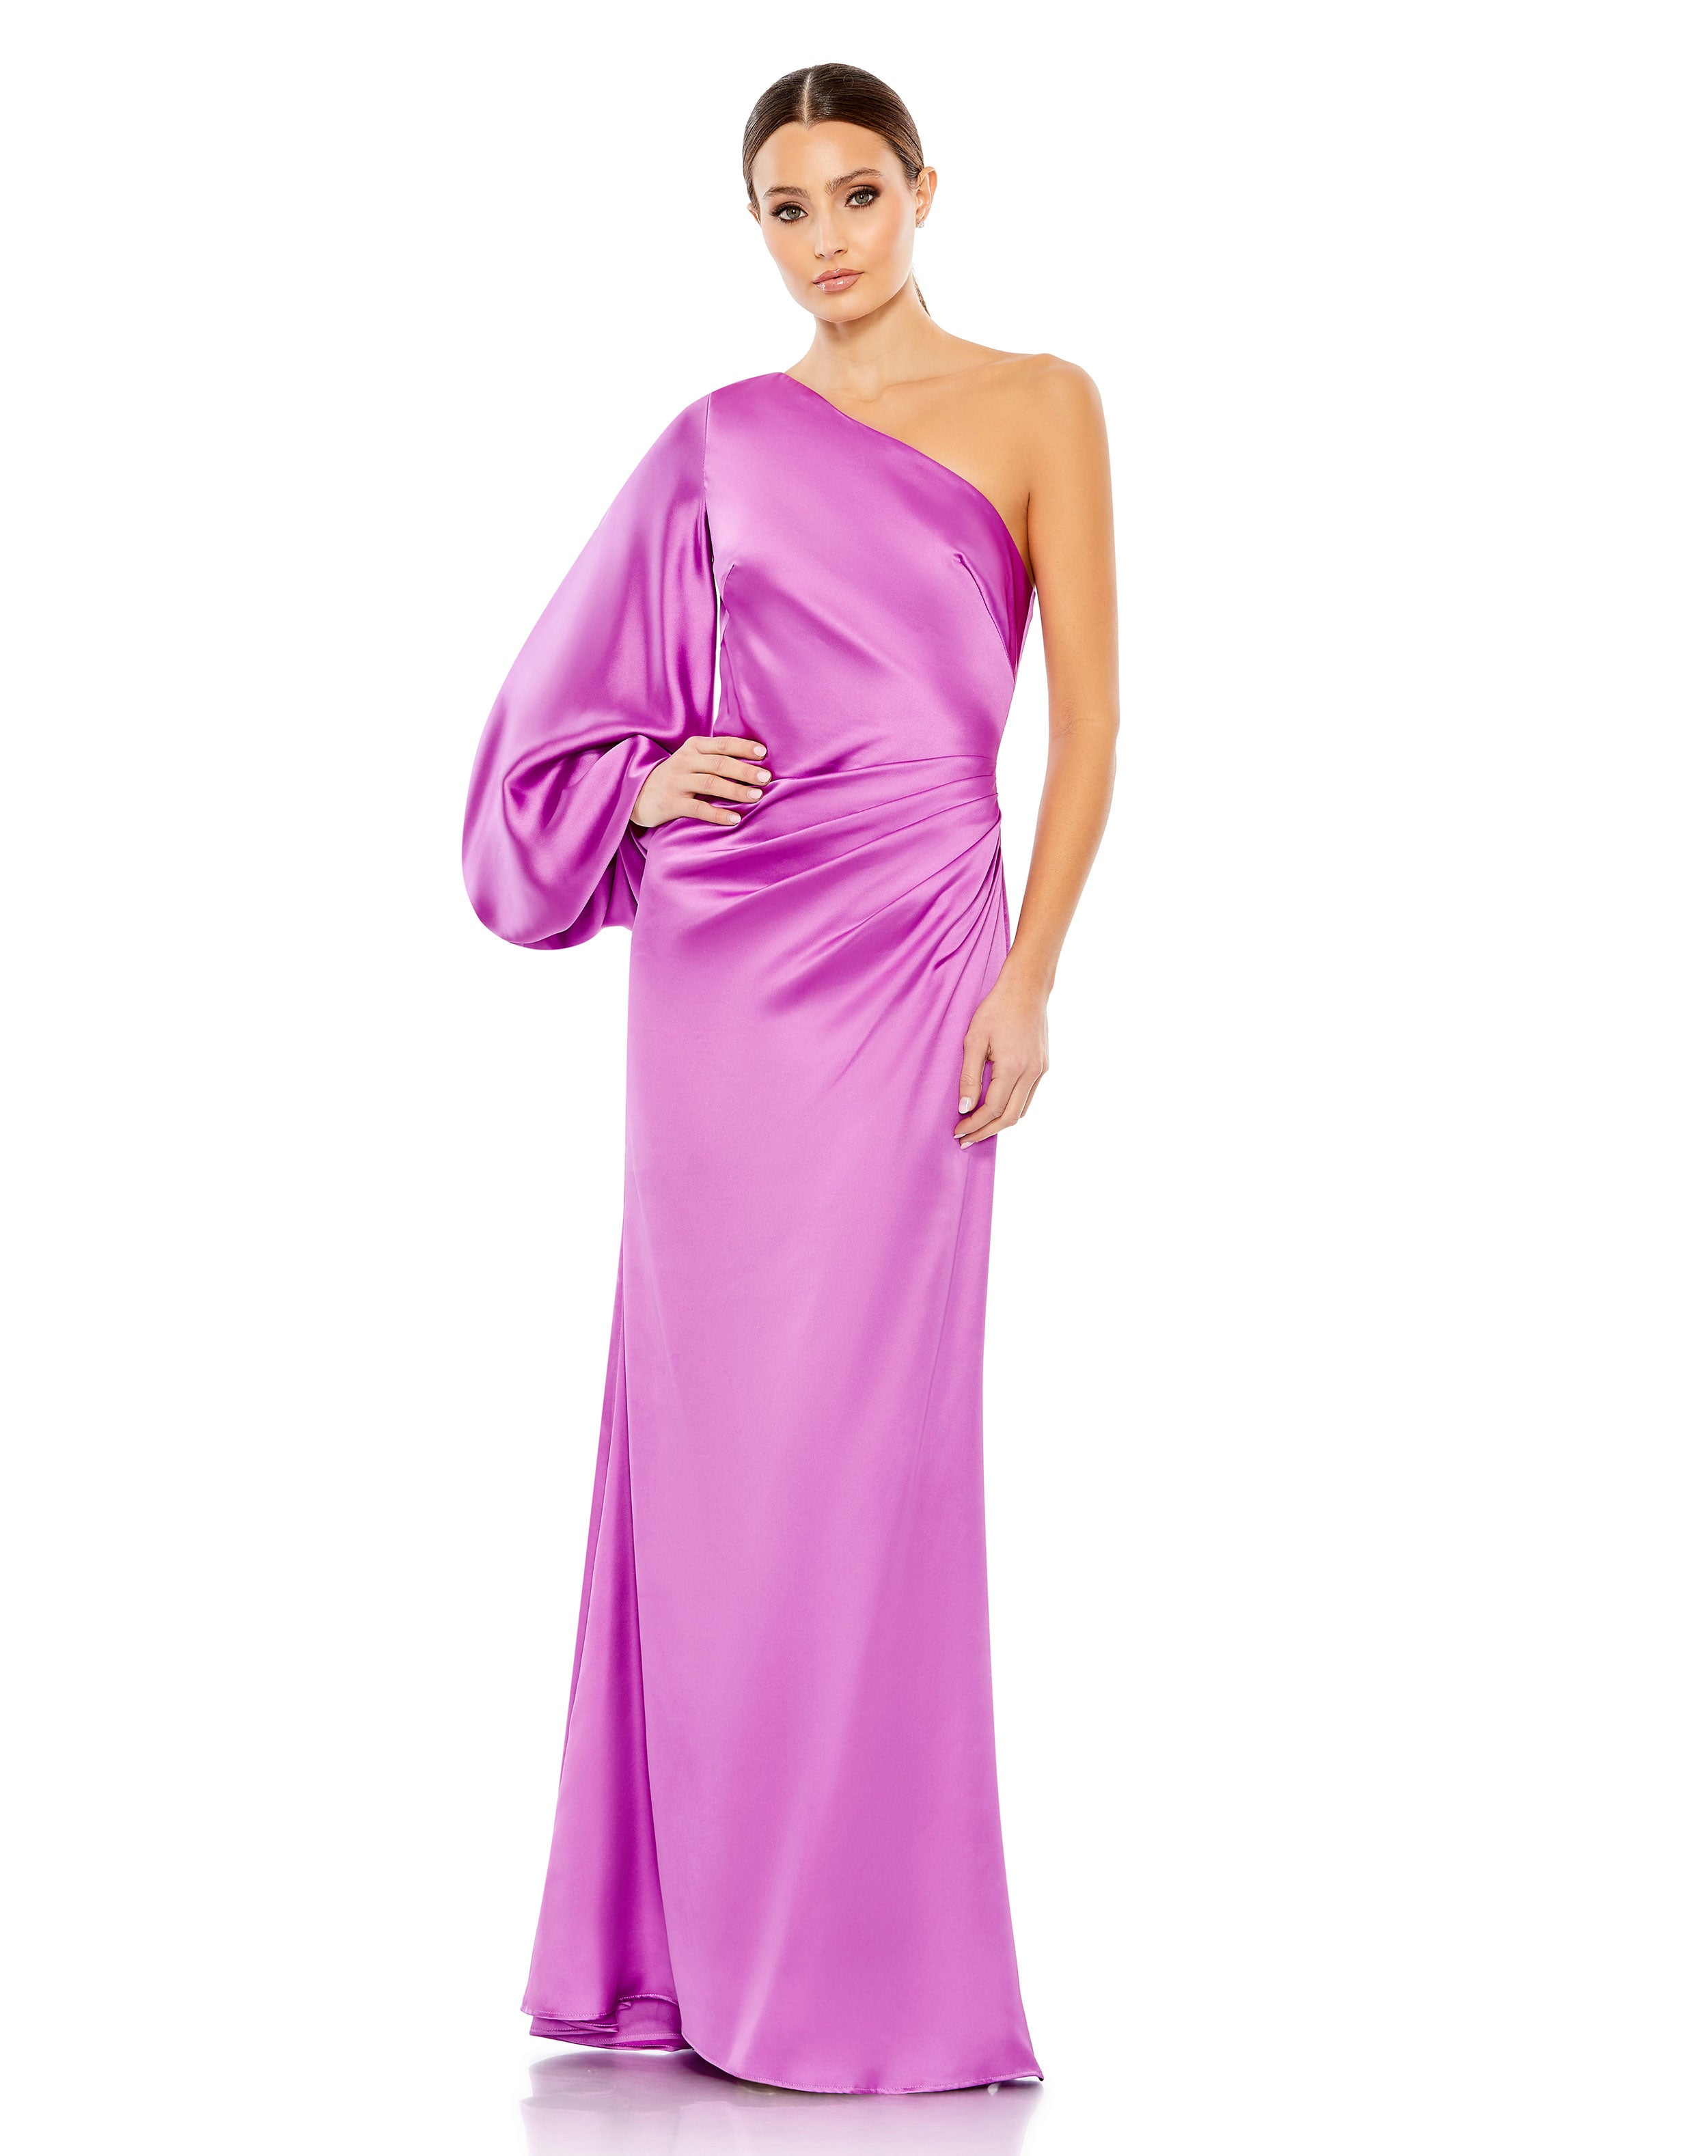 Satin Puff Sleeve Gown